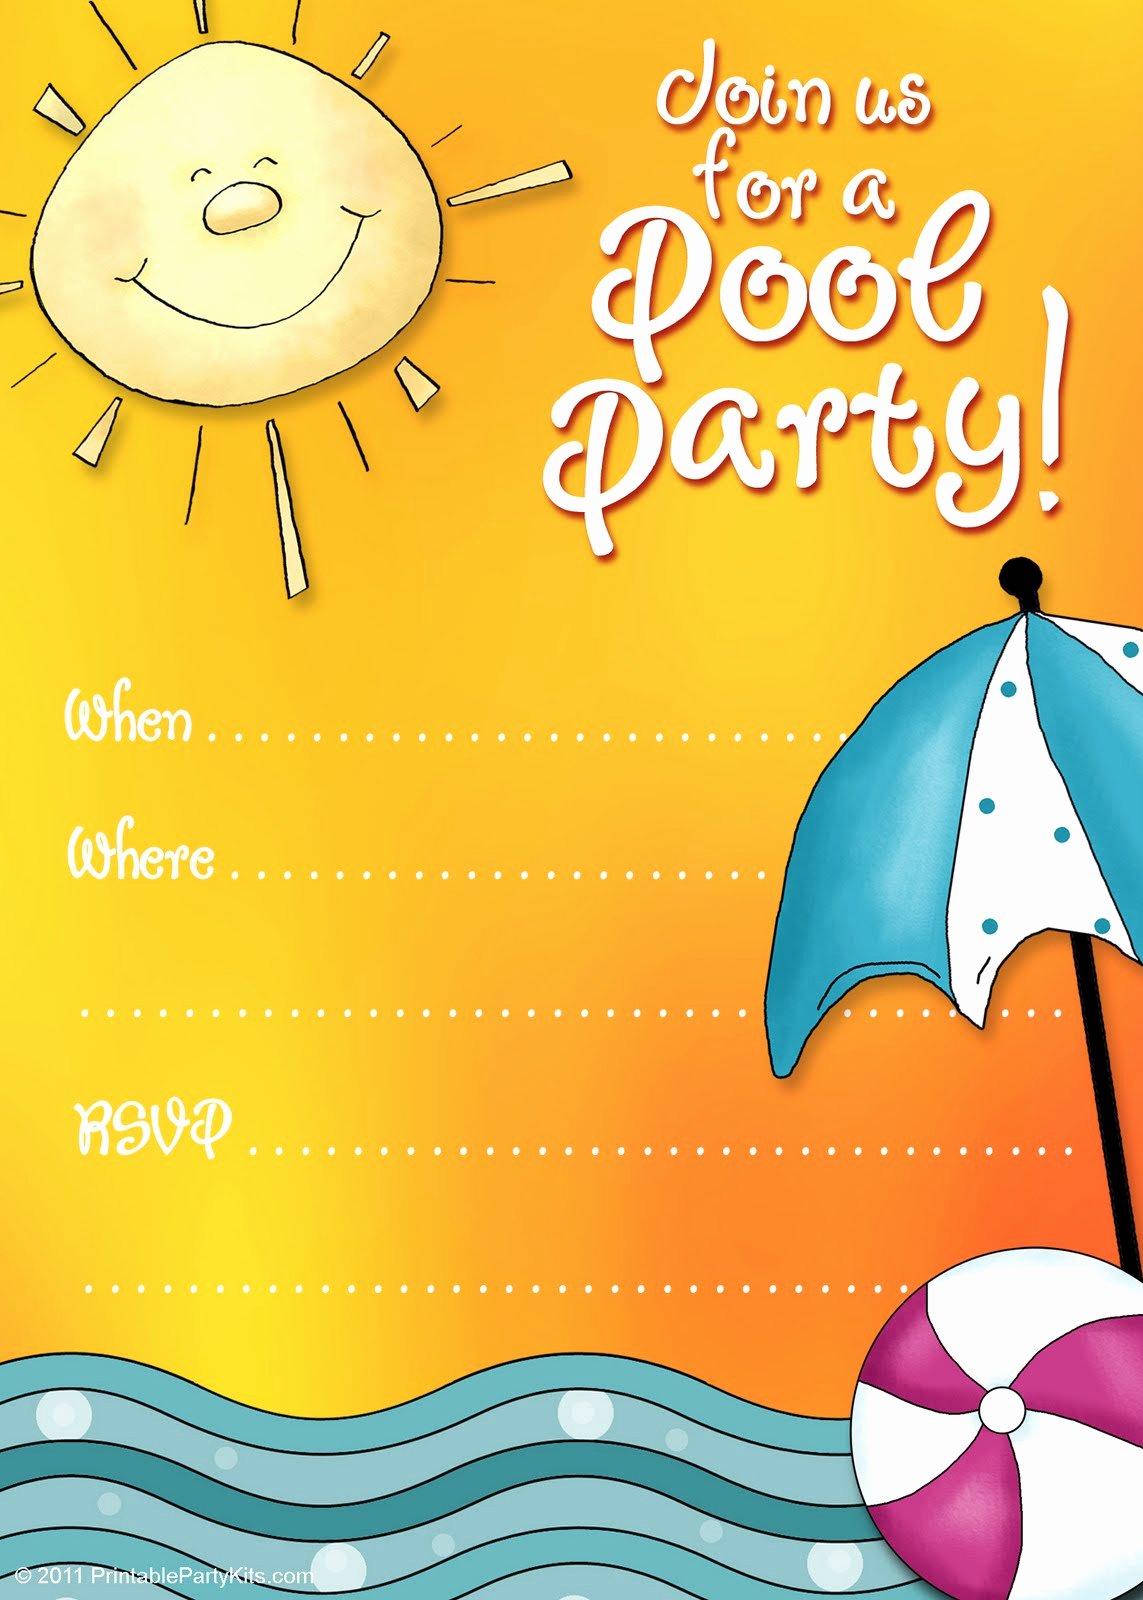 Pool Party Birthday Party Invitations Templates Free